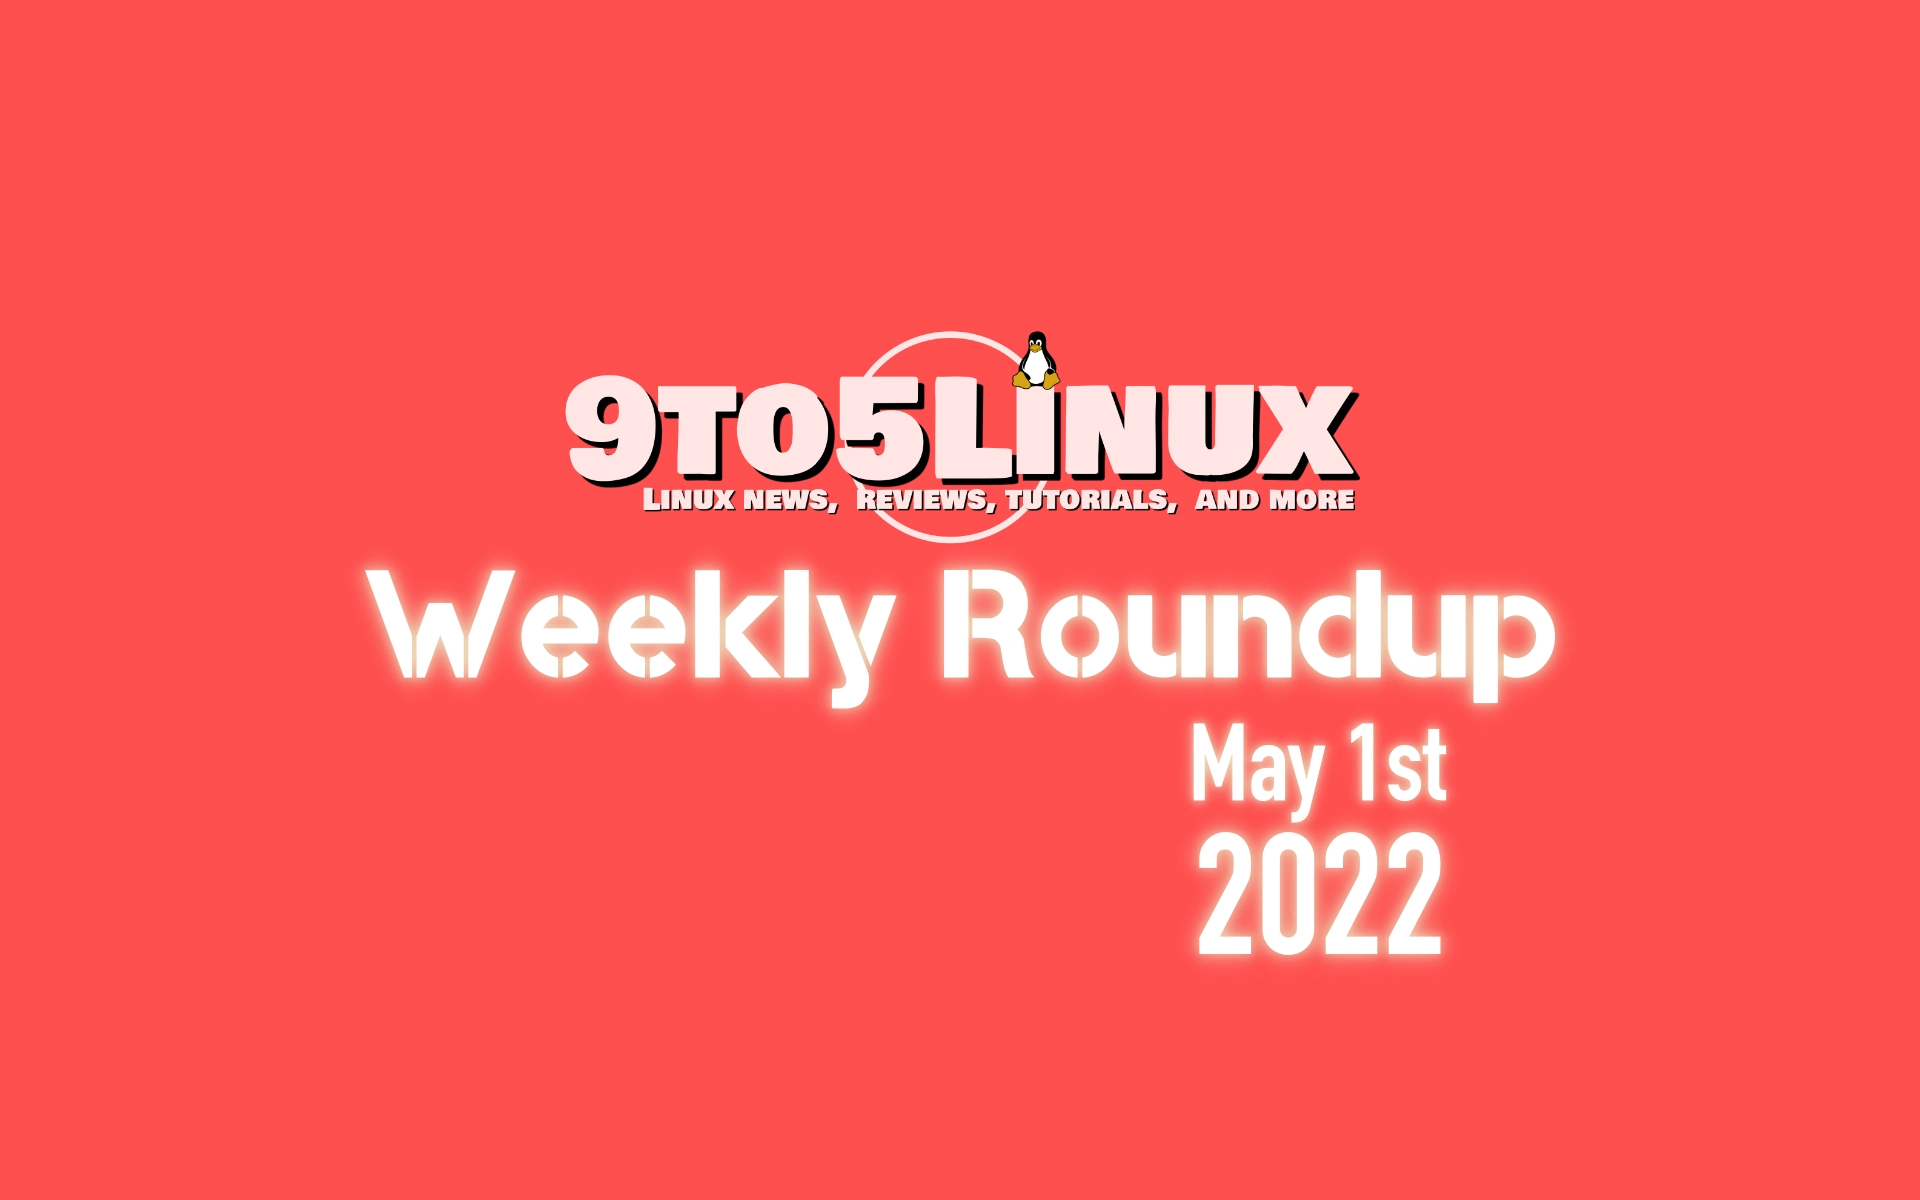 9to5Linux Weekly Roundup: May 1st, 2022